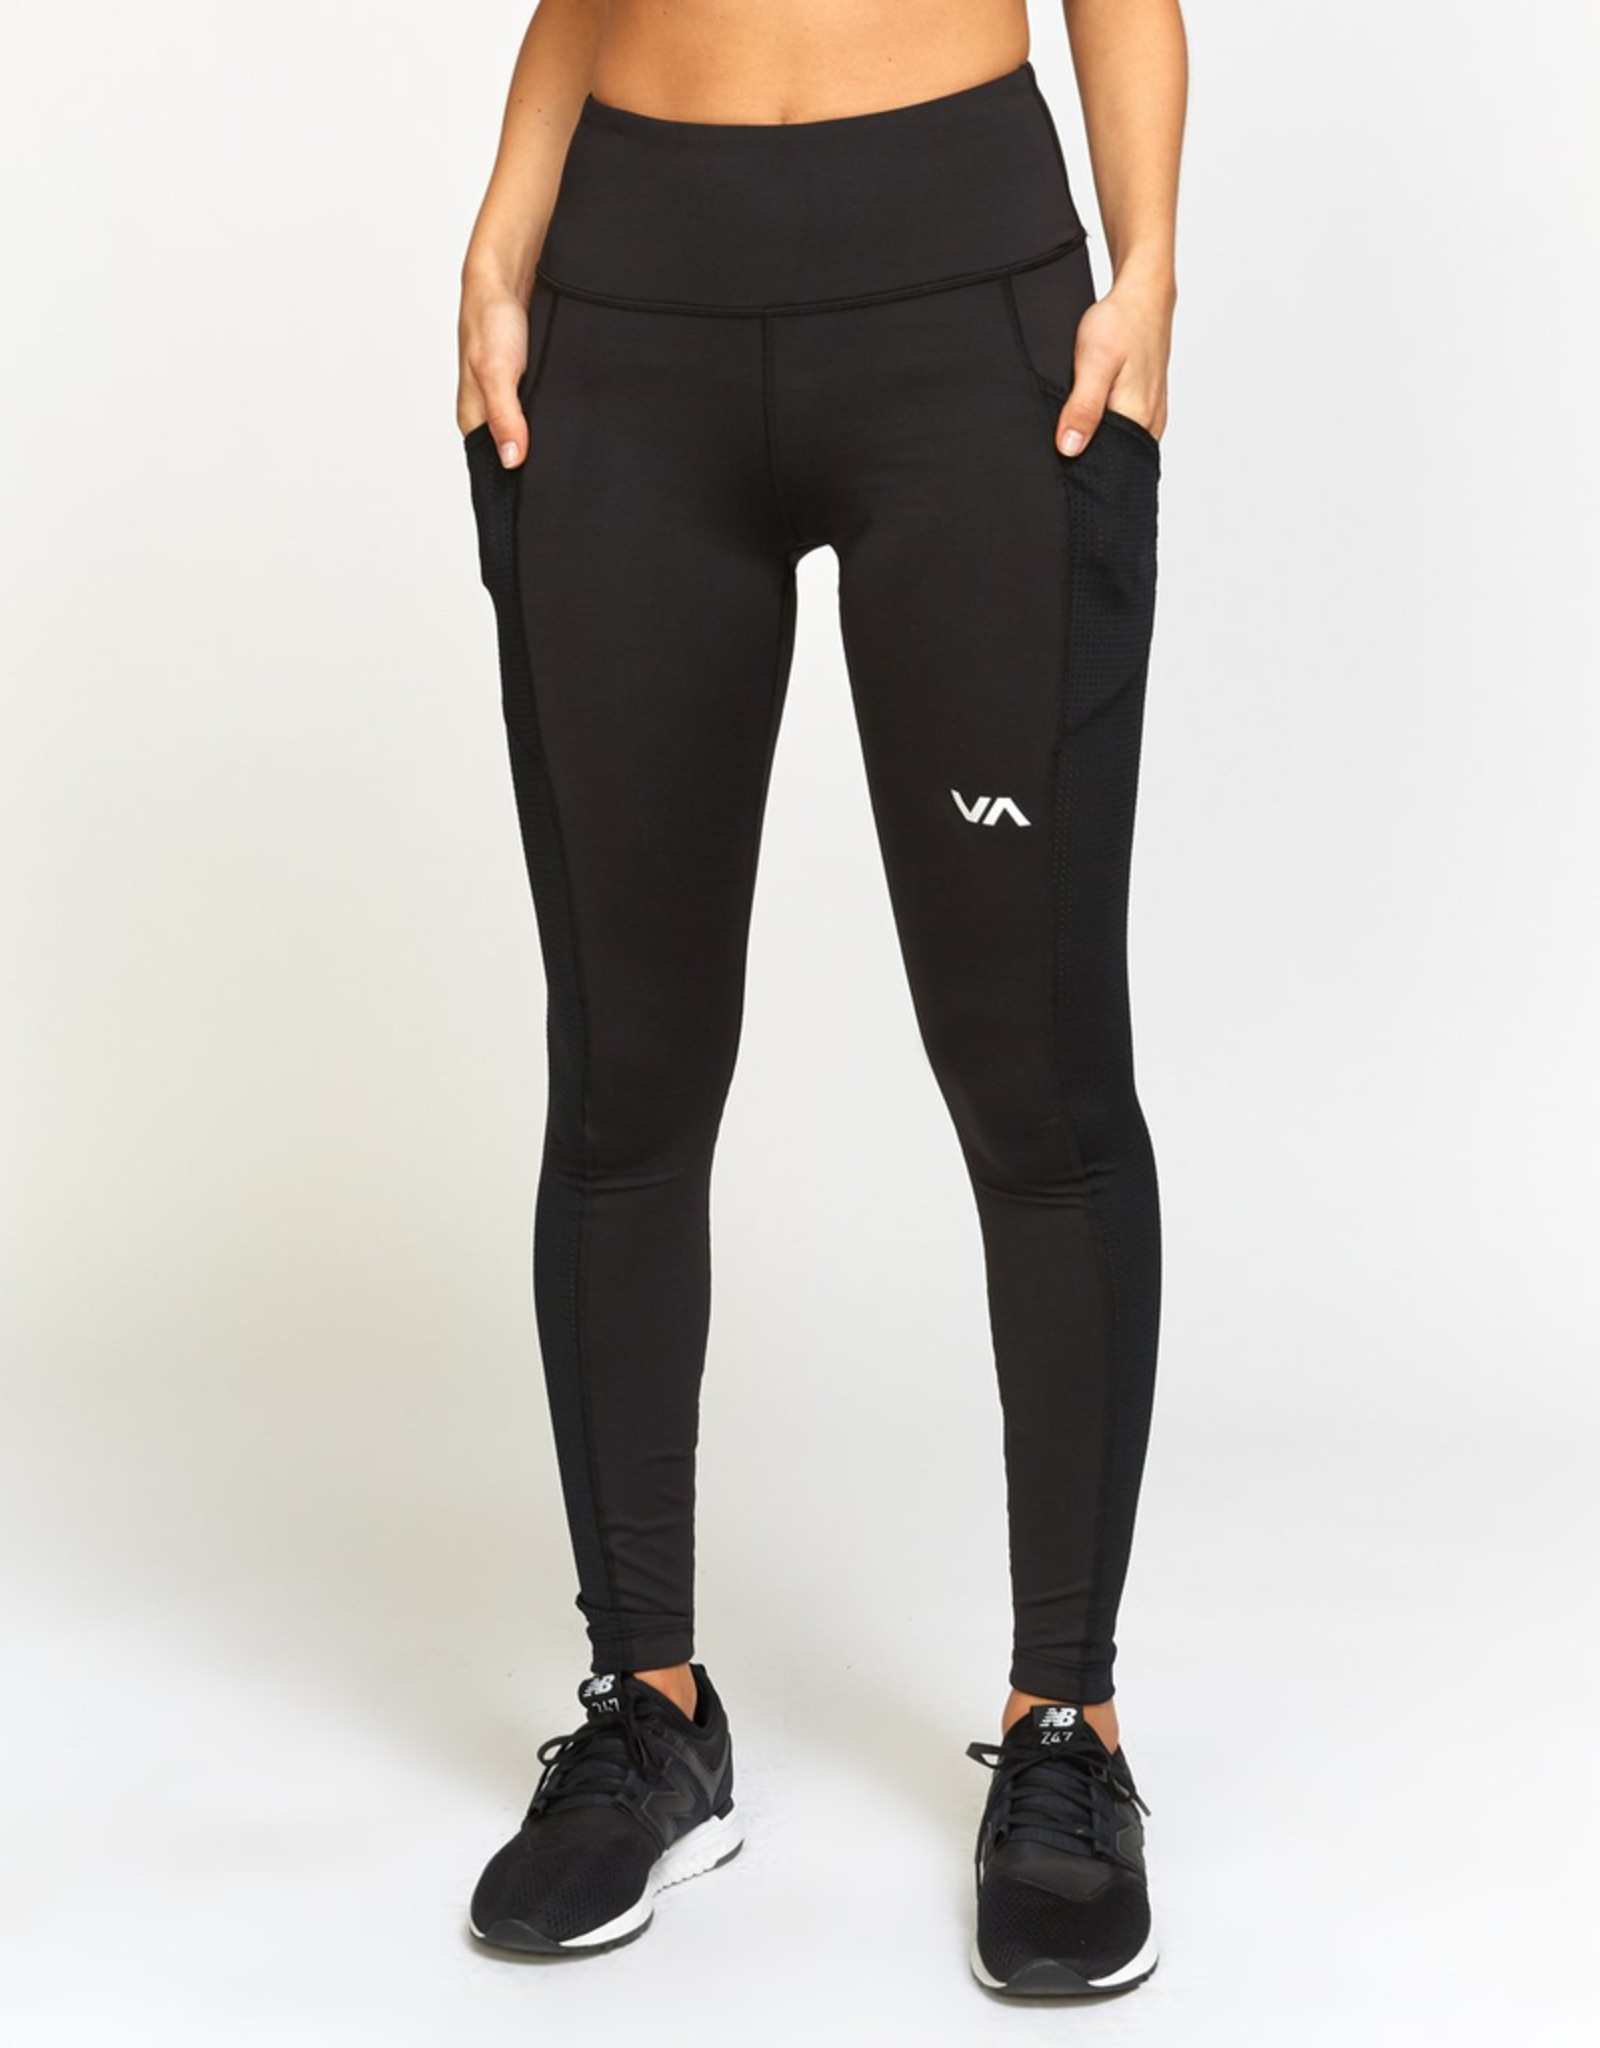 RVCA Womens Atomic Fitted Athlectic Legging 